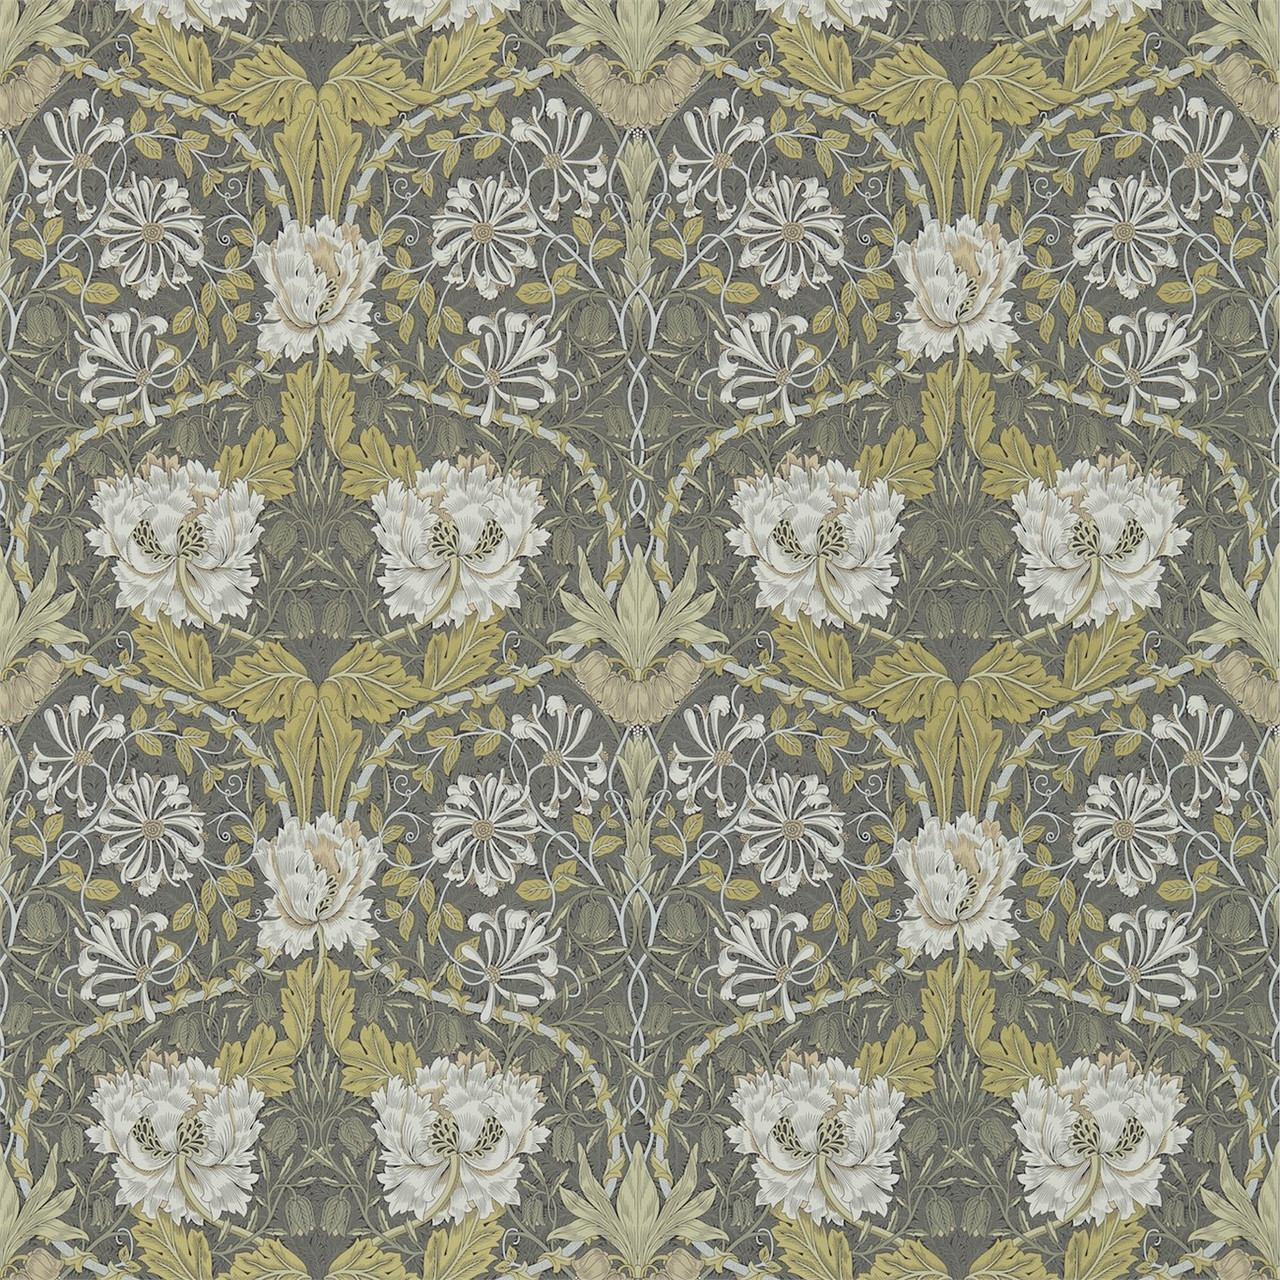 THE CRAFTSMAN WALLPAPERS